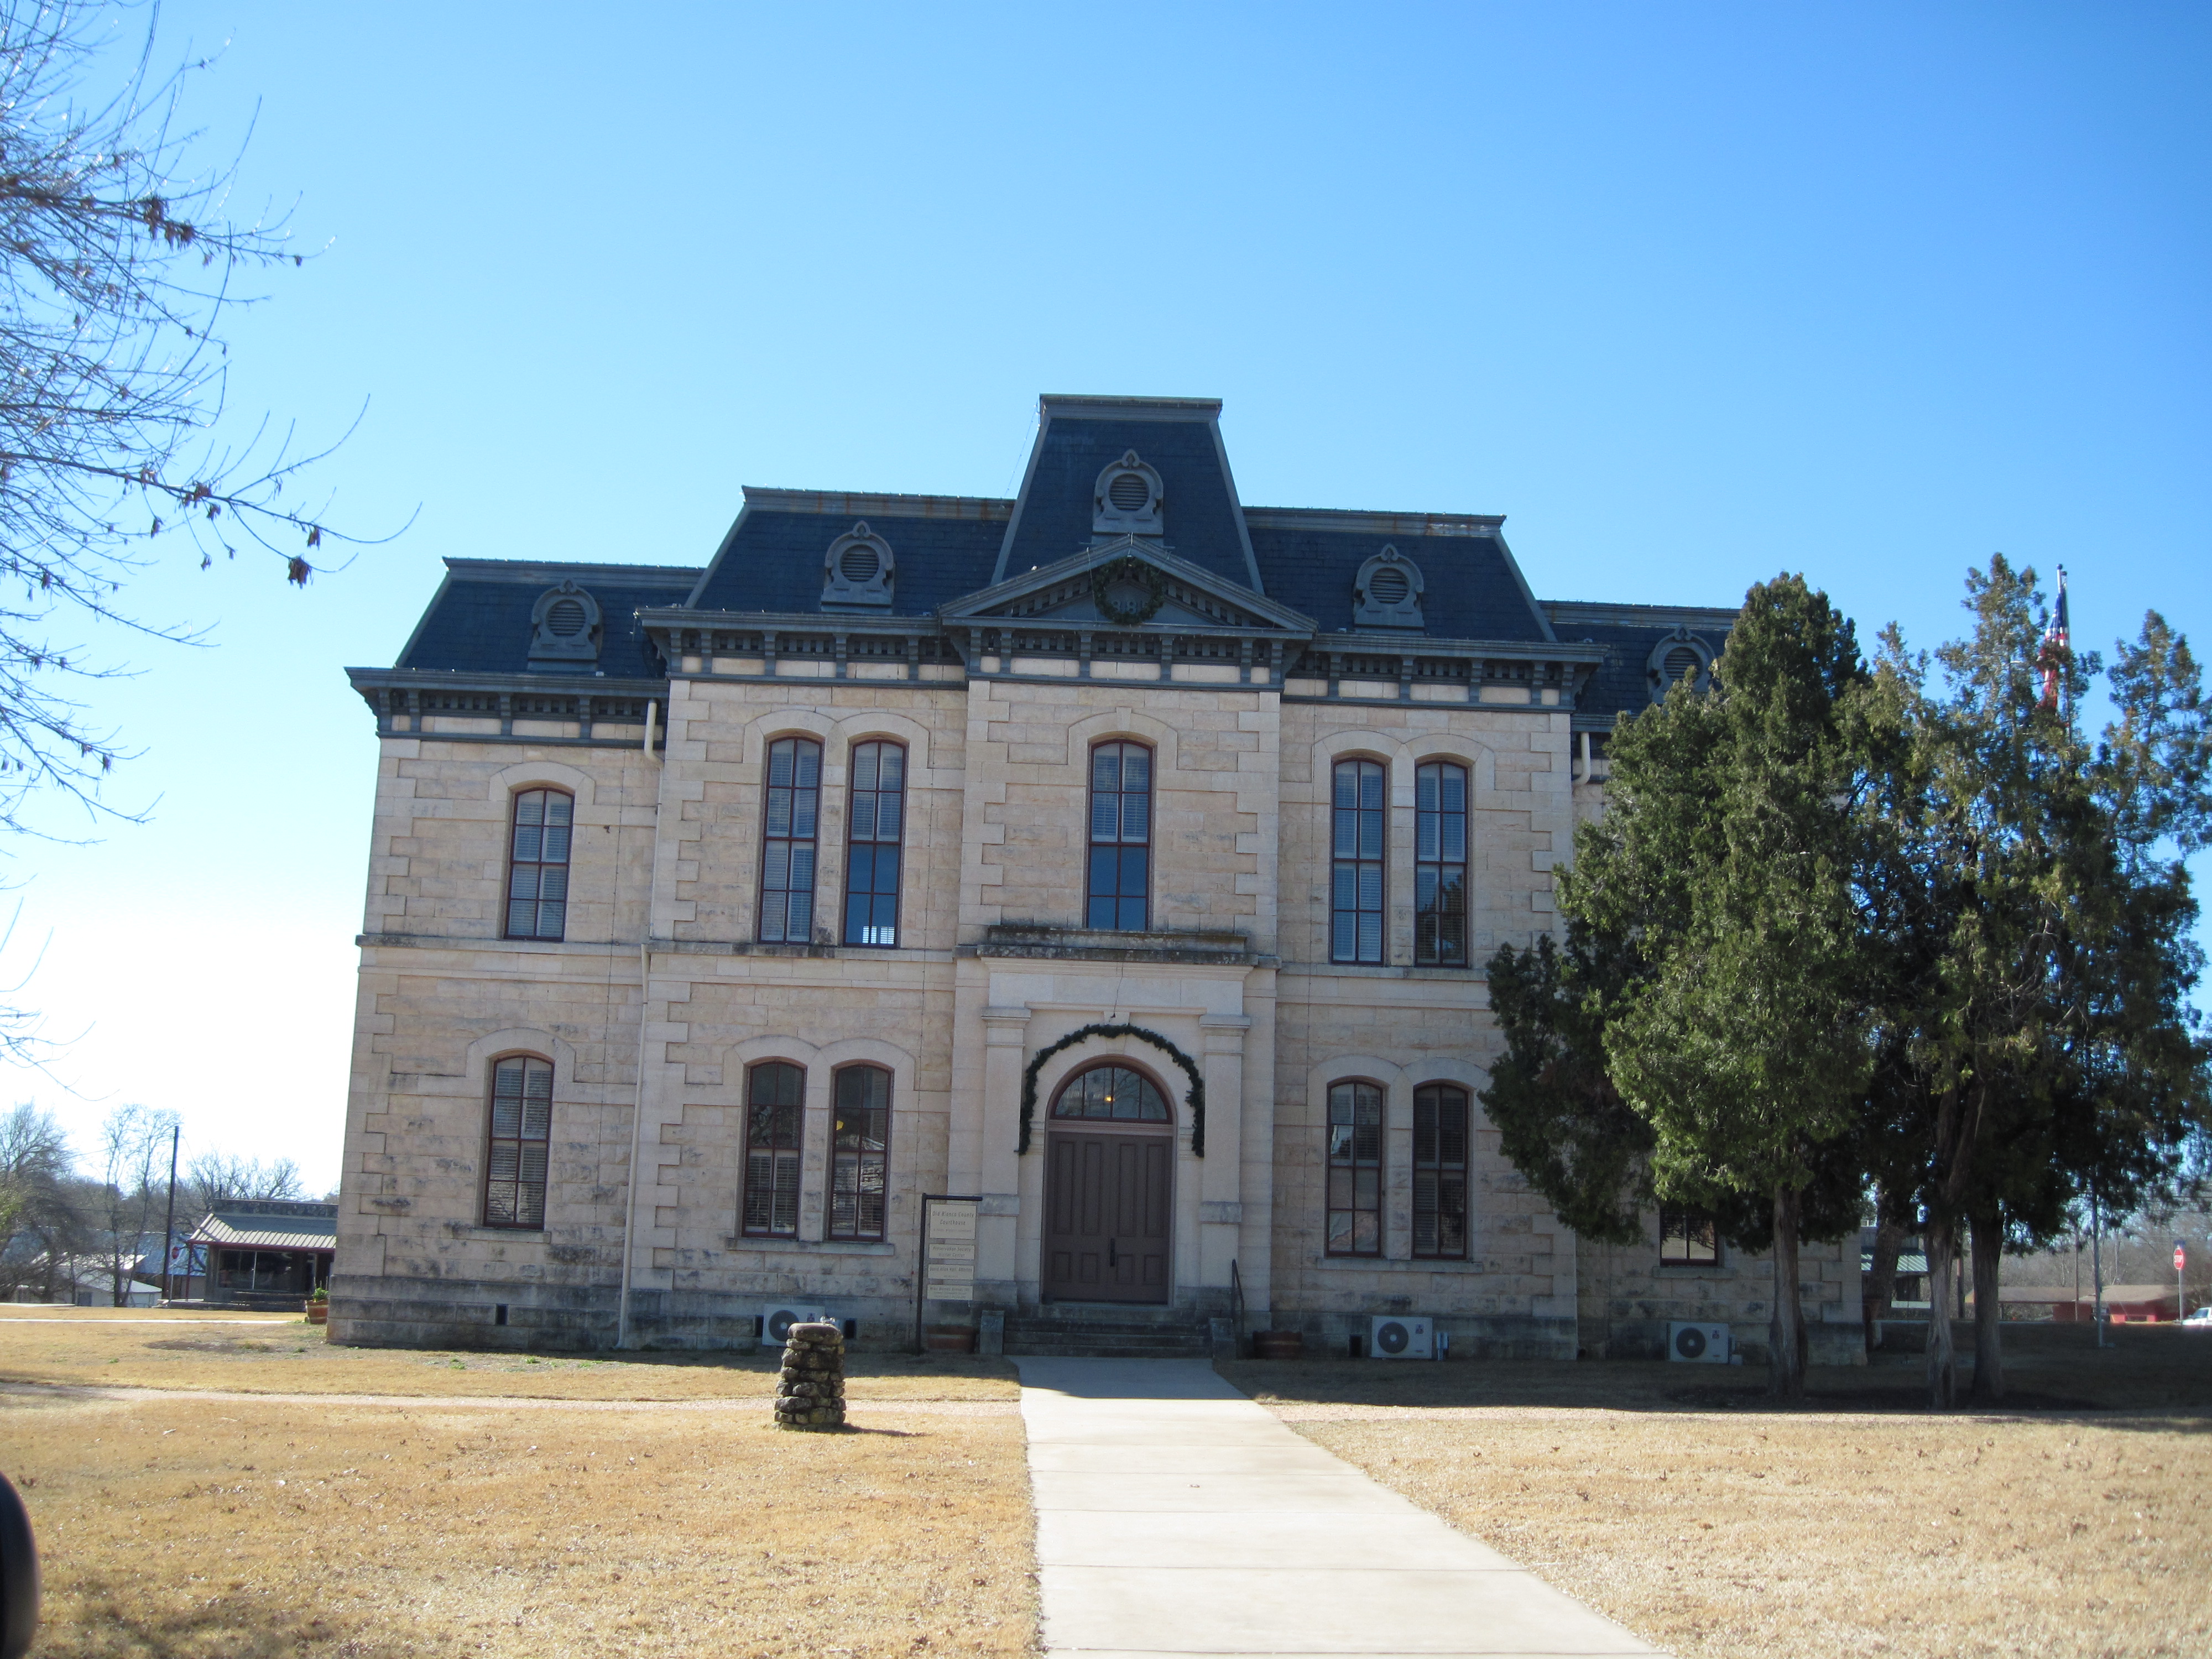 The Old Blanco County Court House